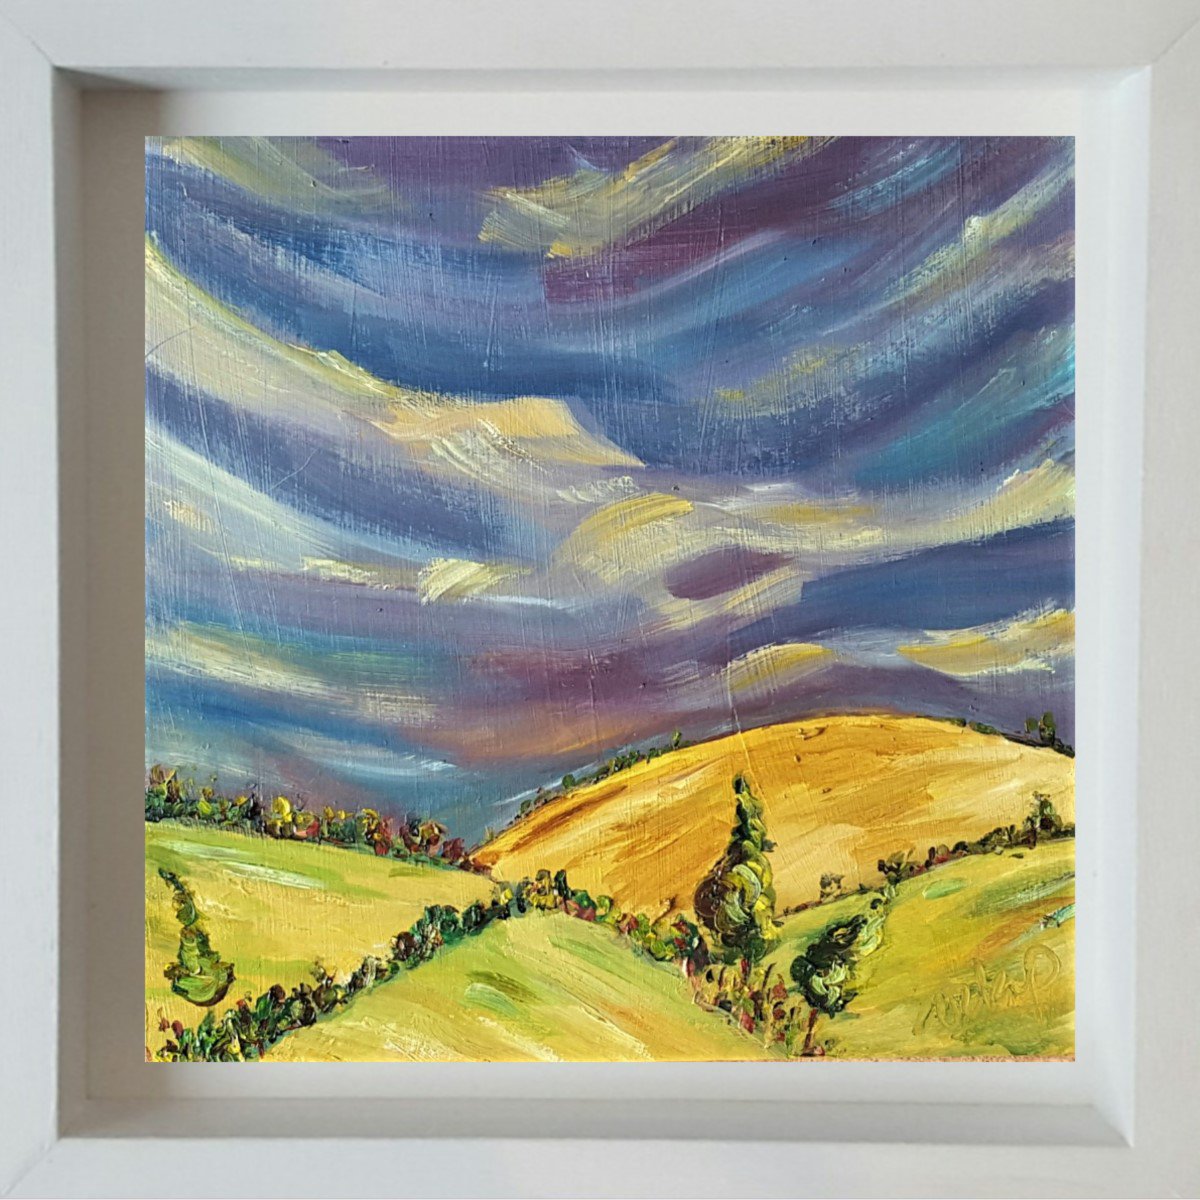 Thunder clouds over the scorched fields of Summer, Wicklow Ireland by Niki Purcell - Irish Landscape Painting